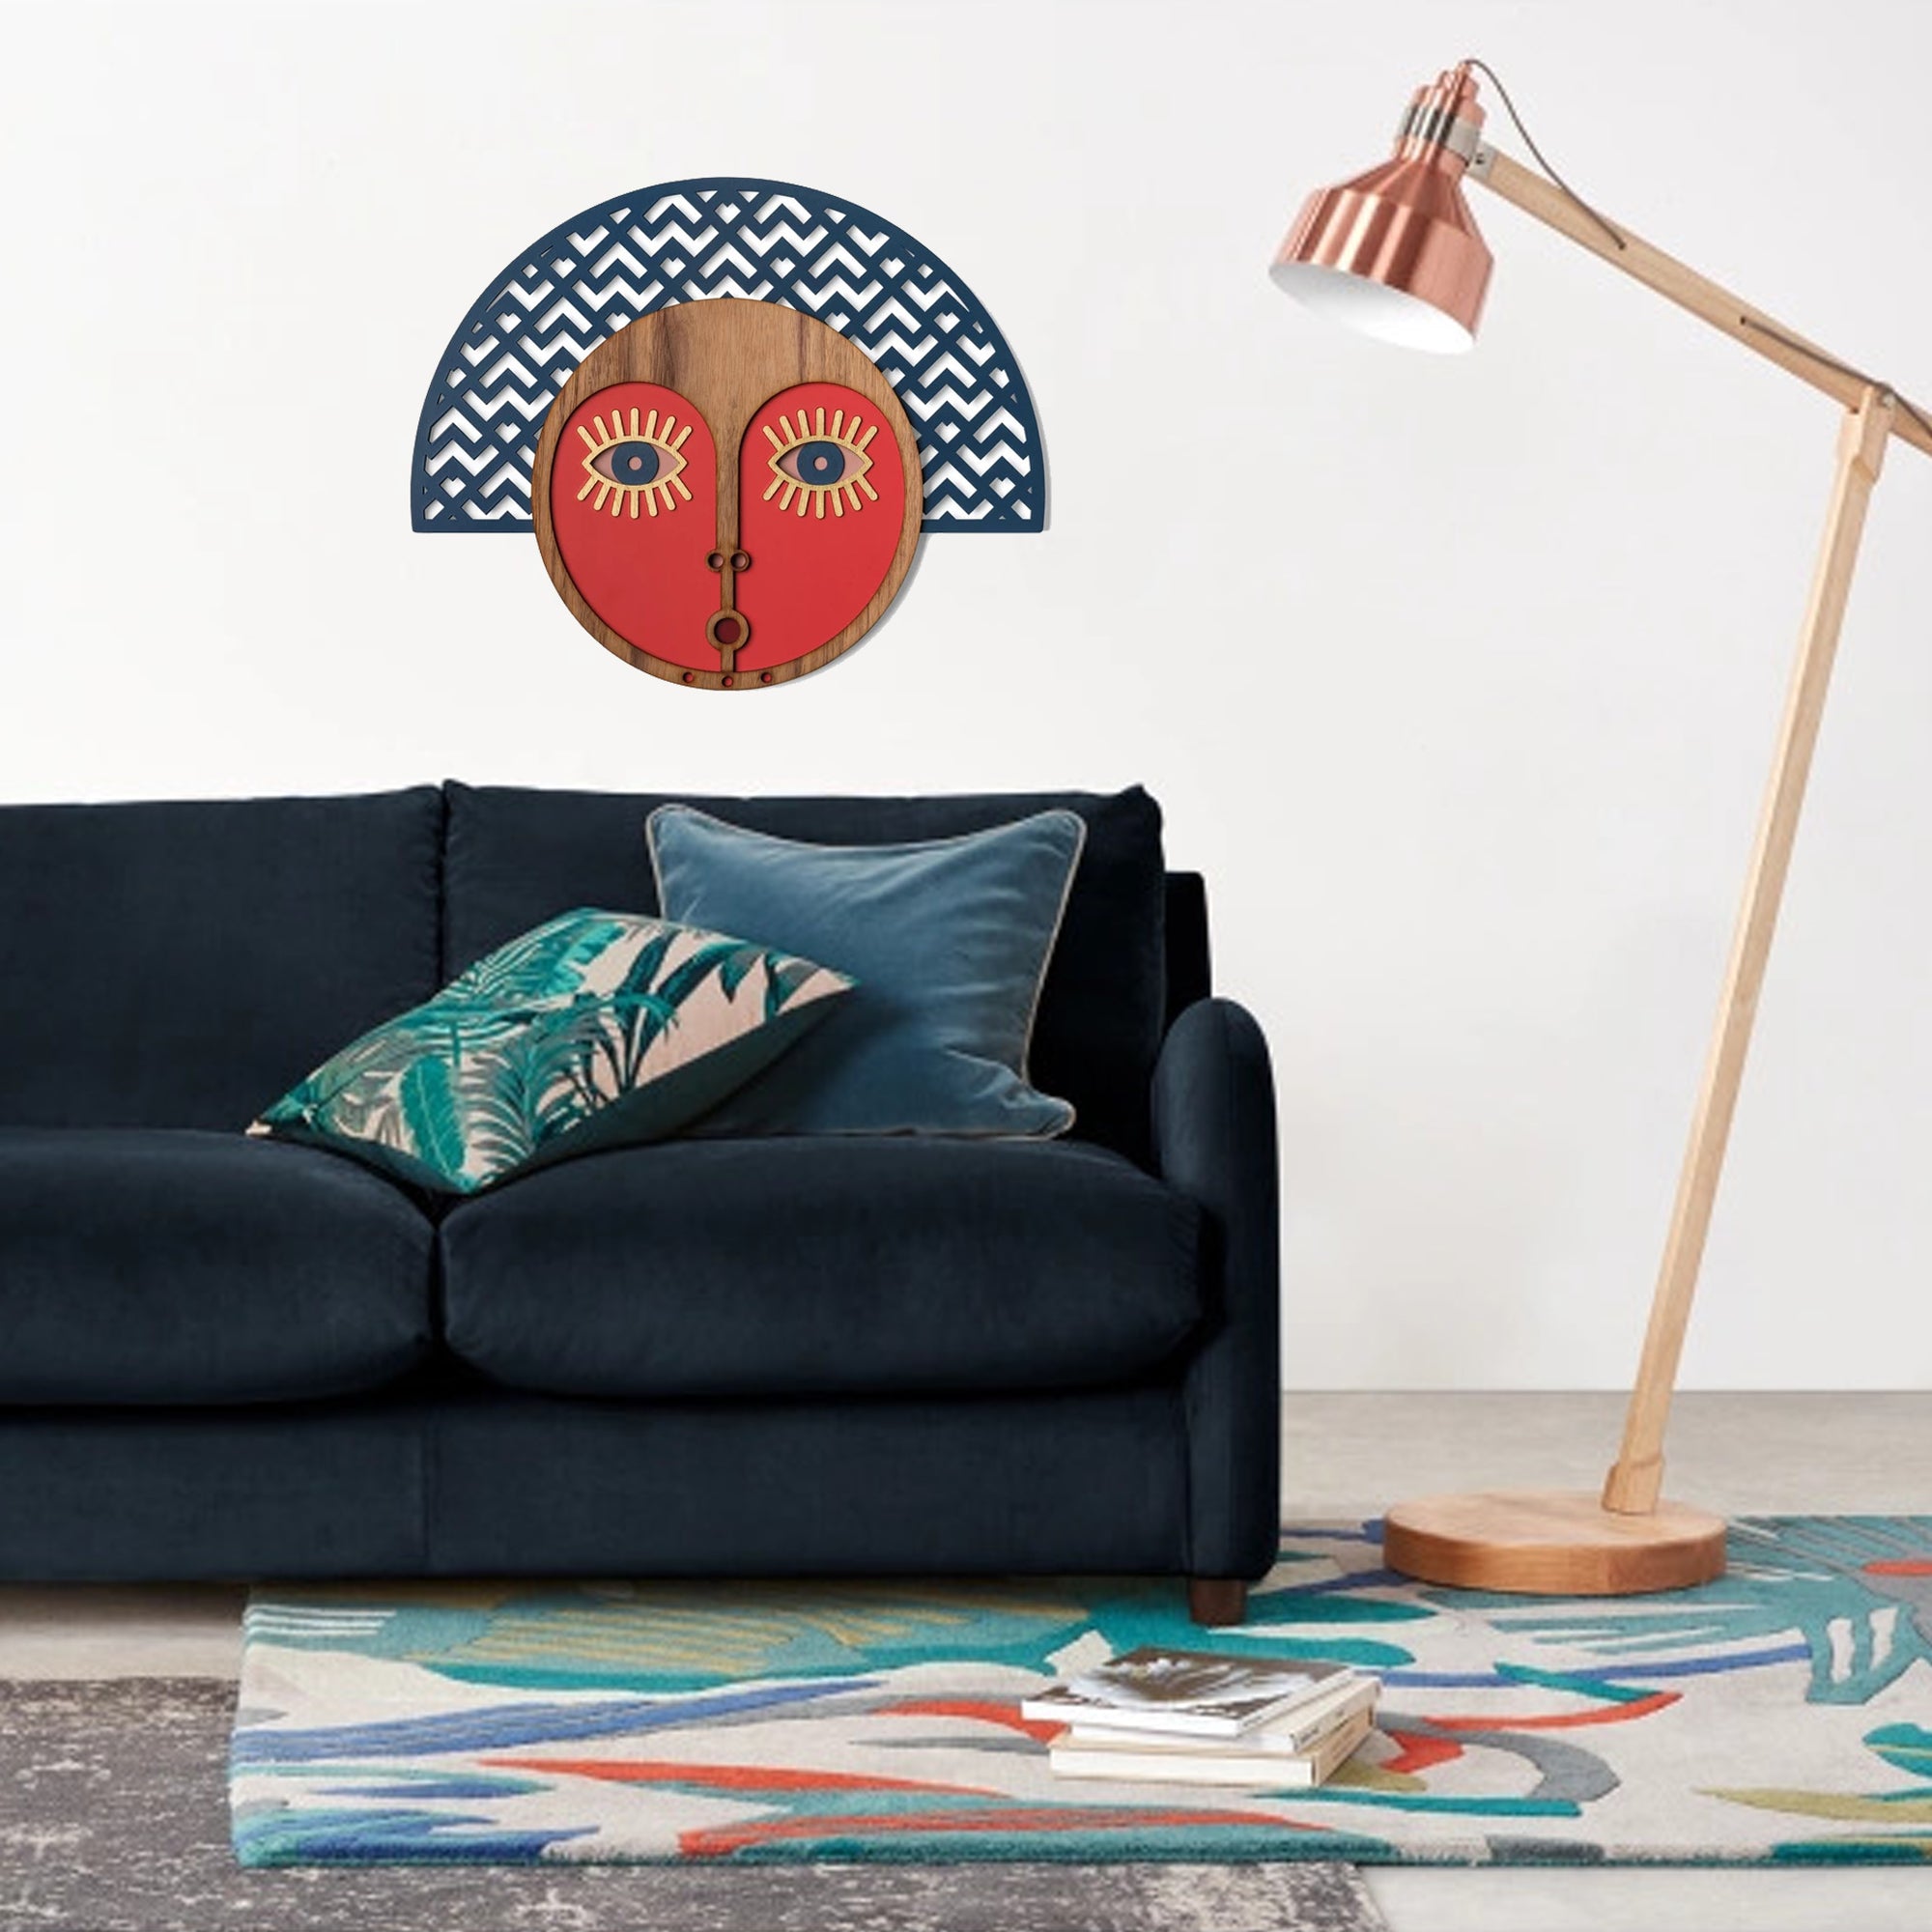 Living Room Wall Decor with African Wall Mask